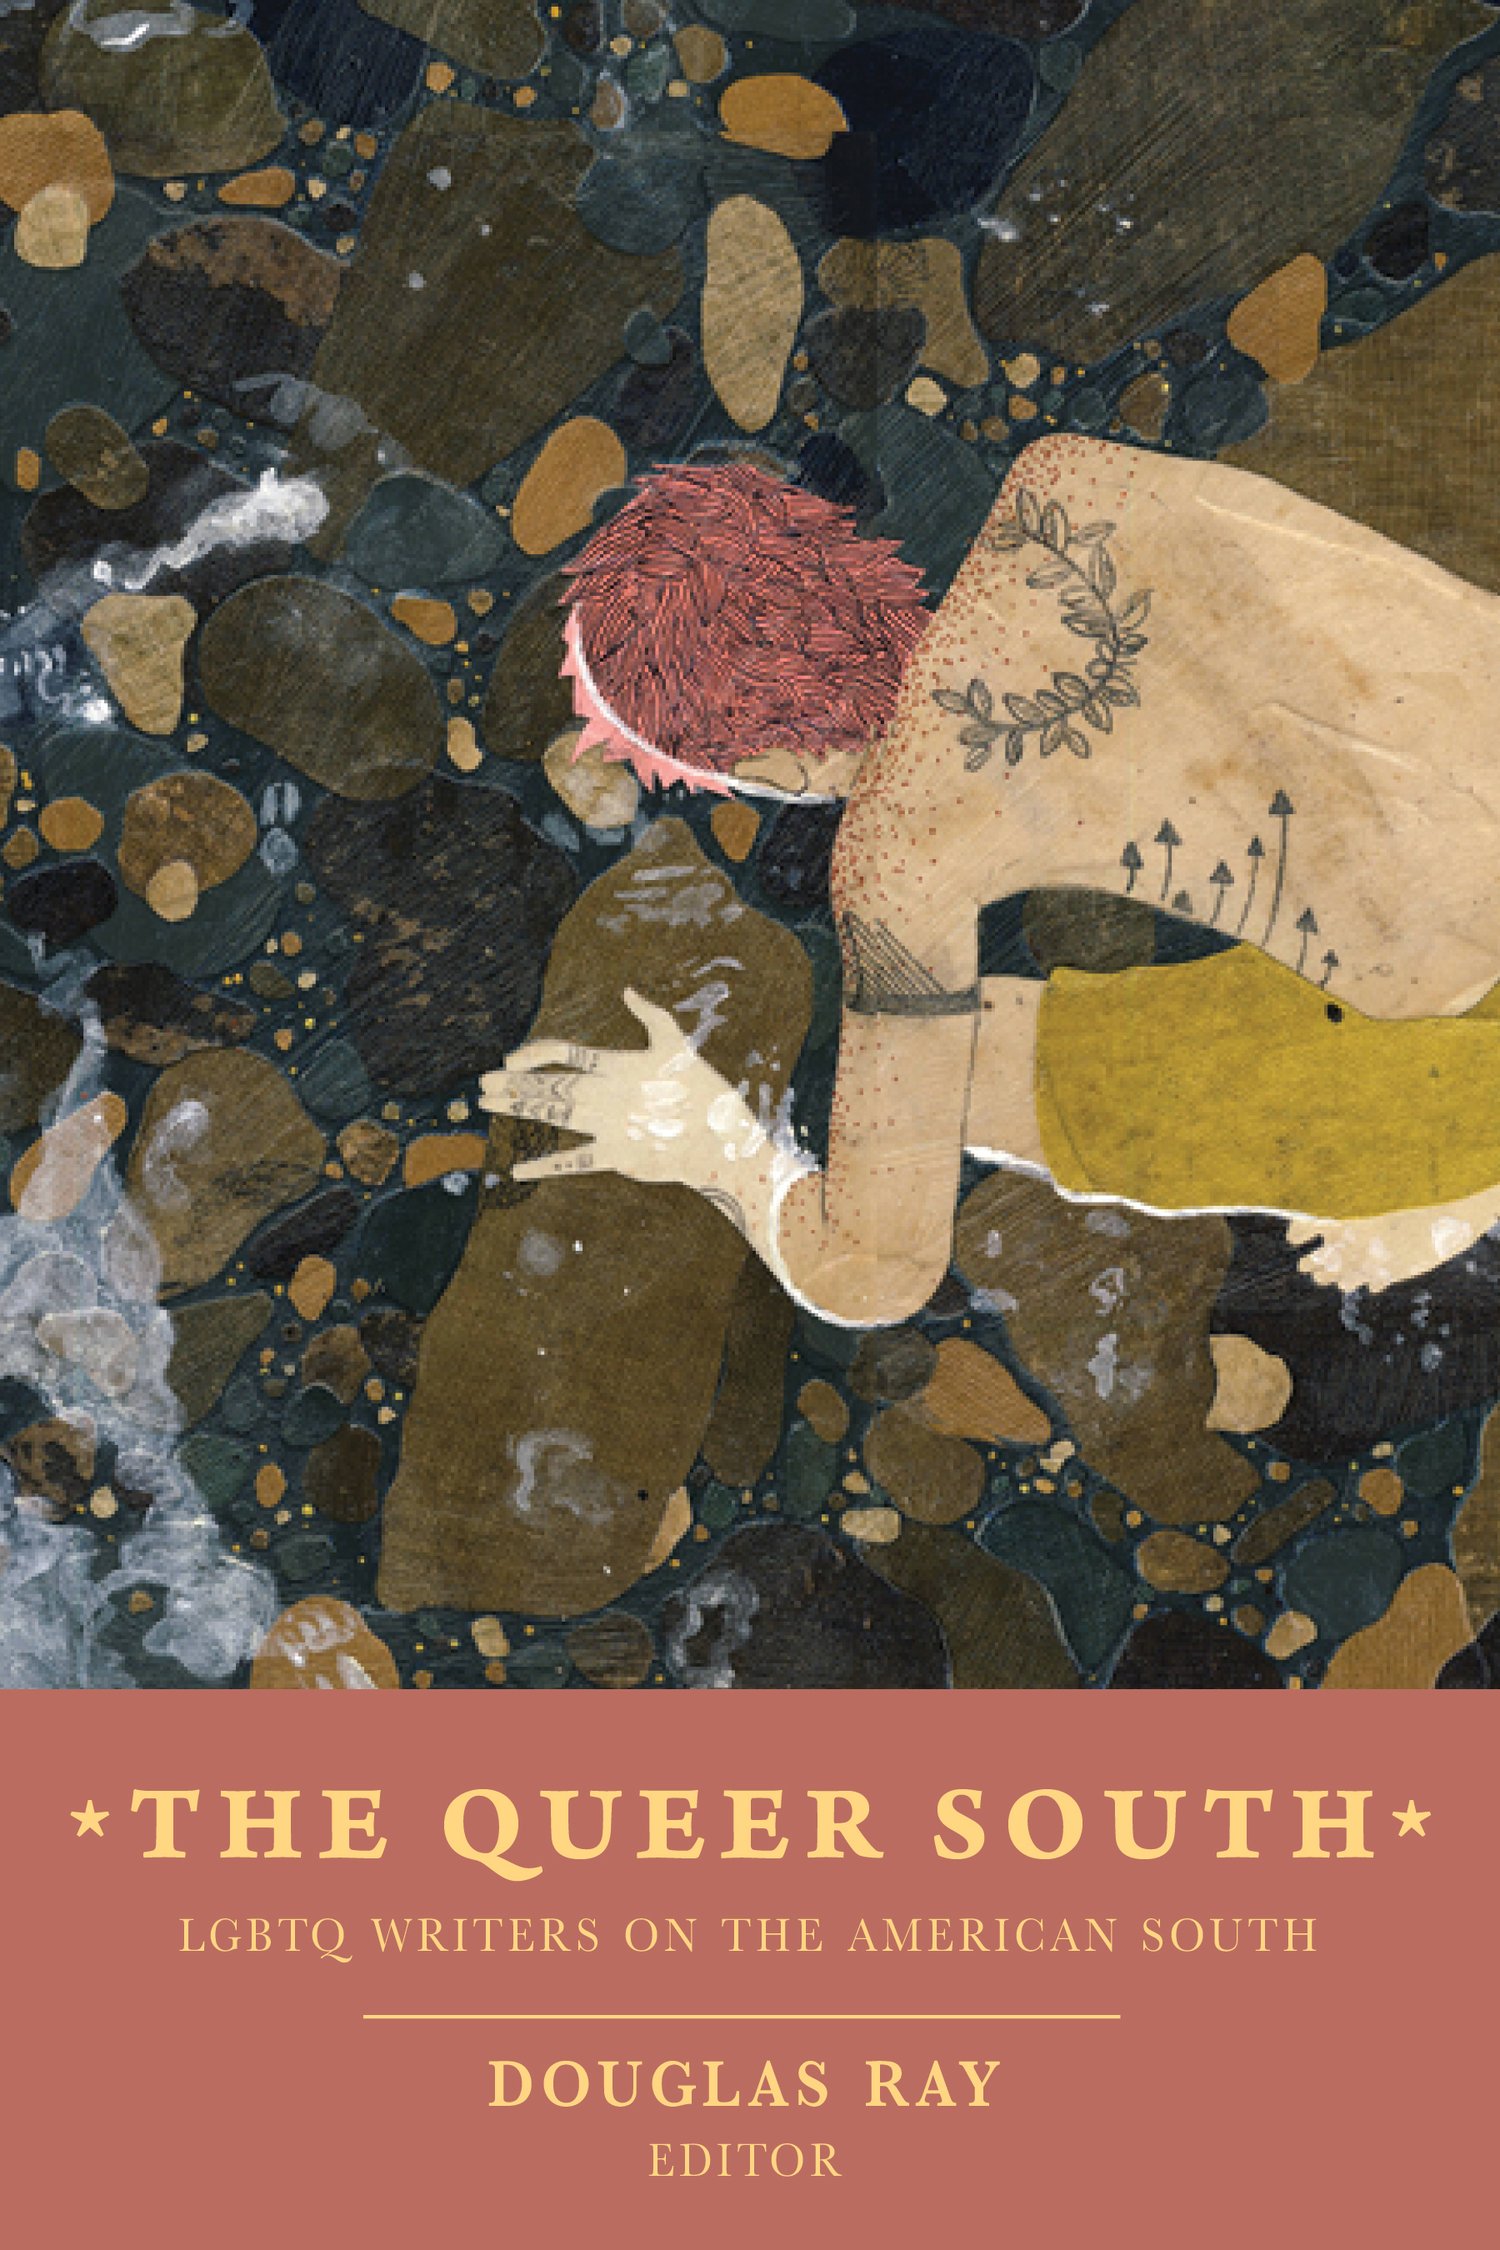 Image of The Queer South: LGBTQ Writers on the American South (Douglas Ray, Editor)